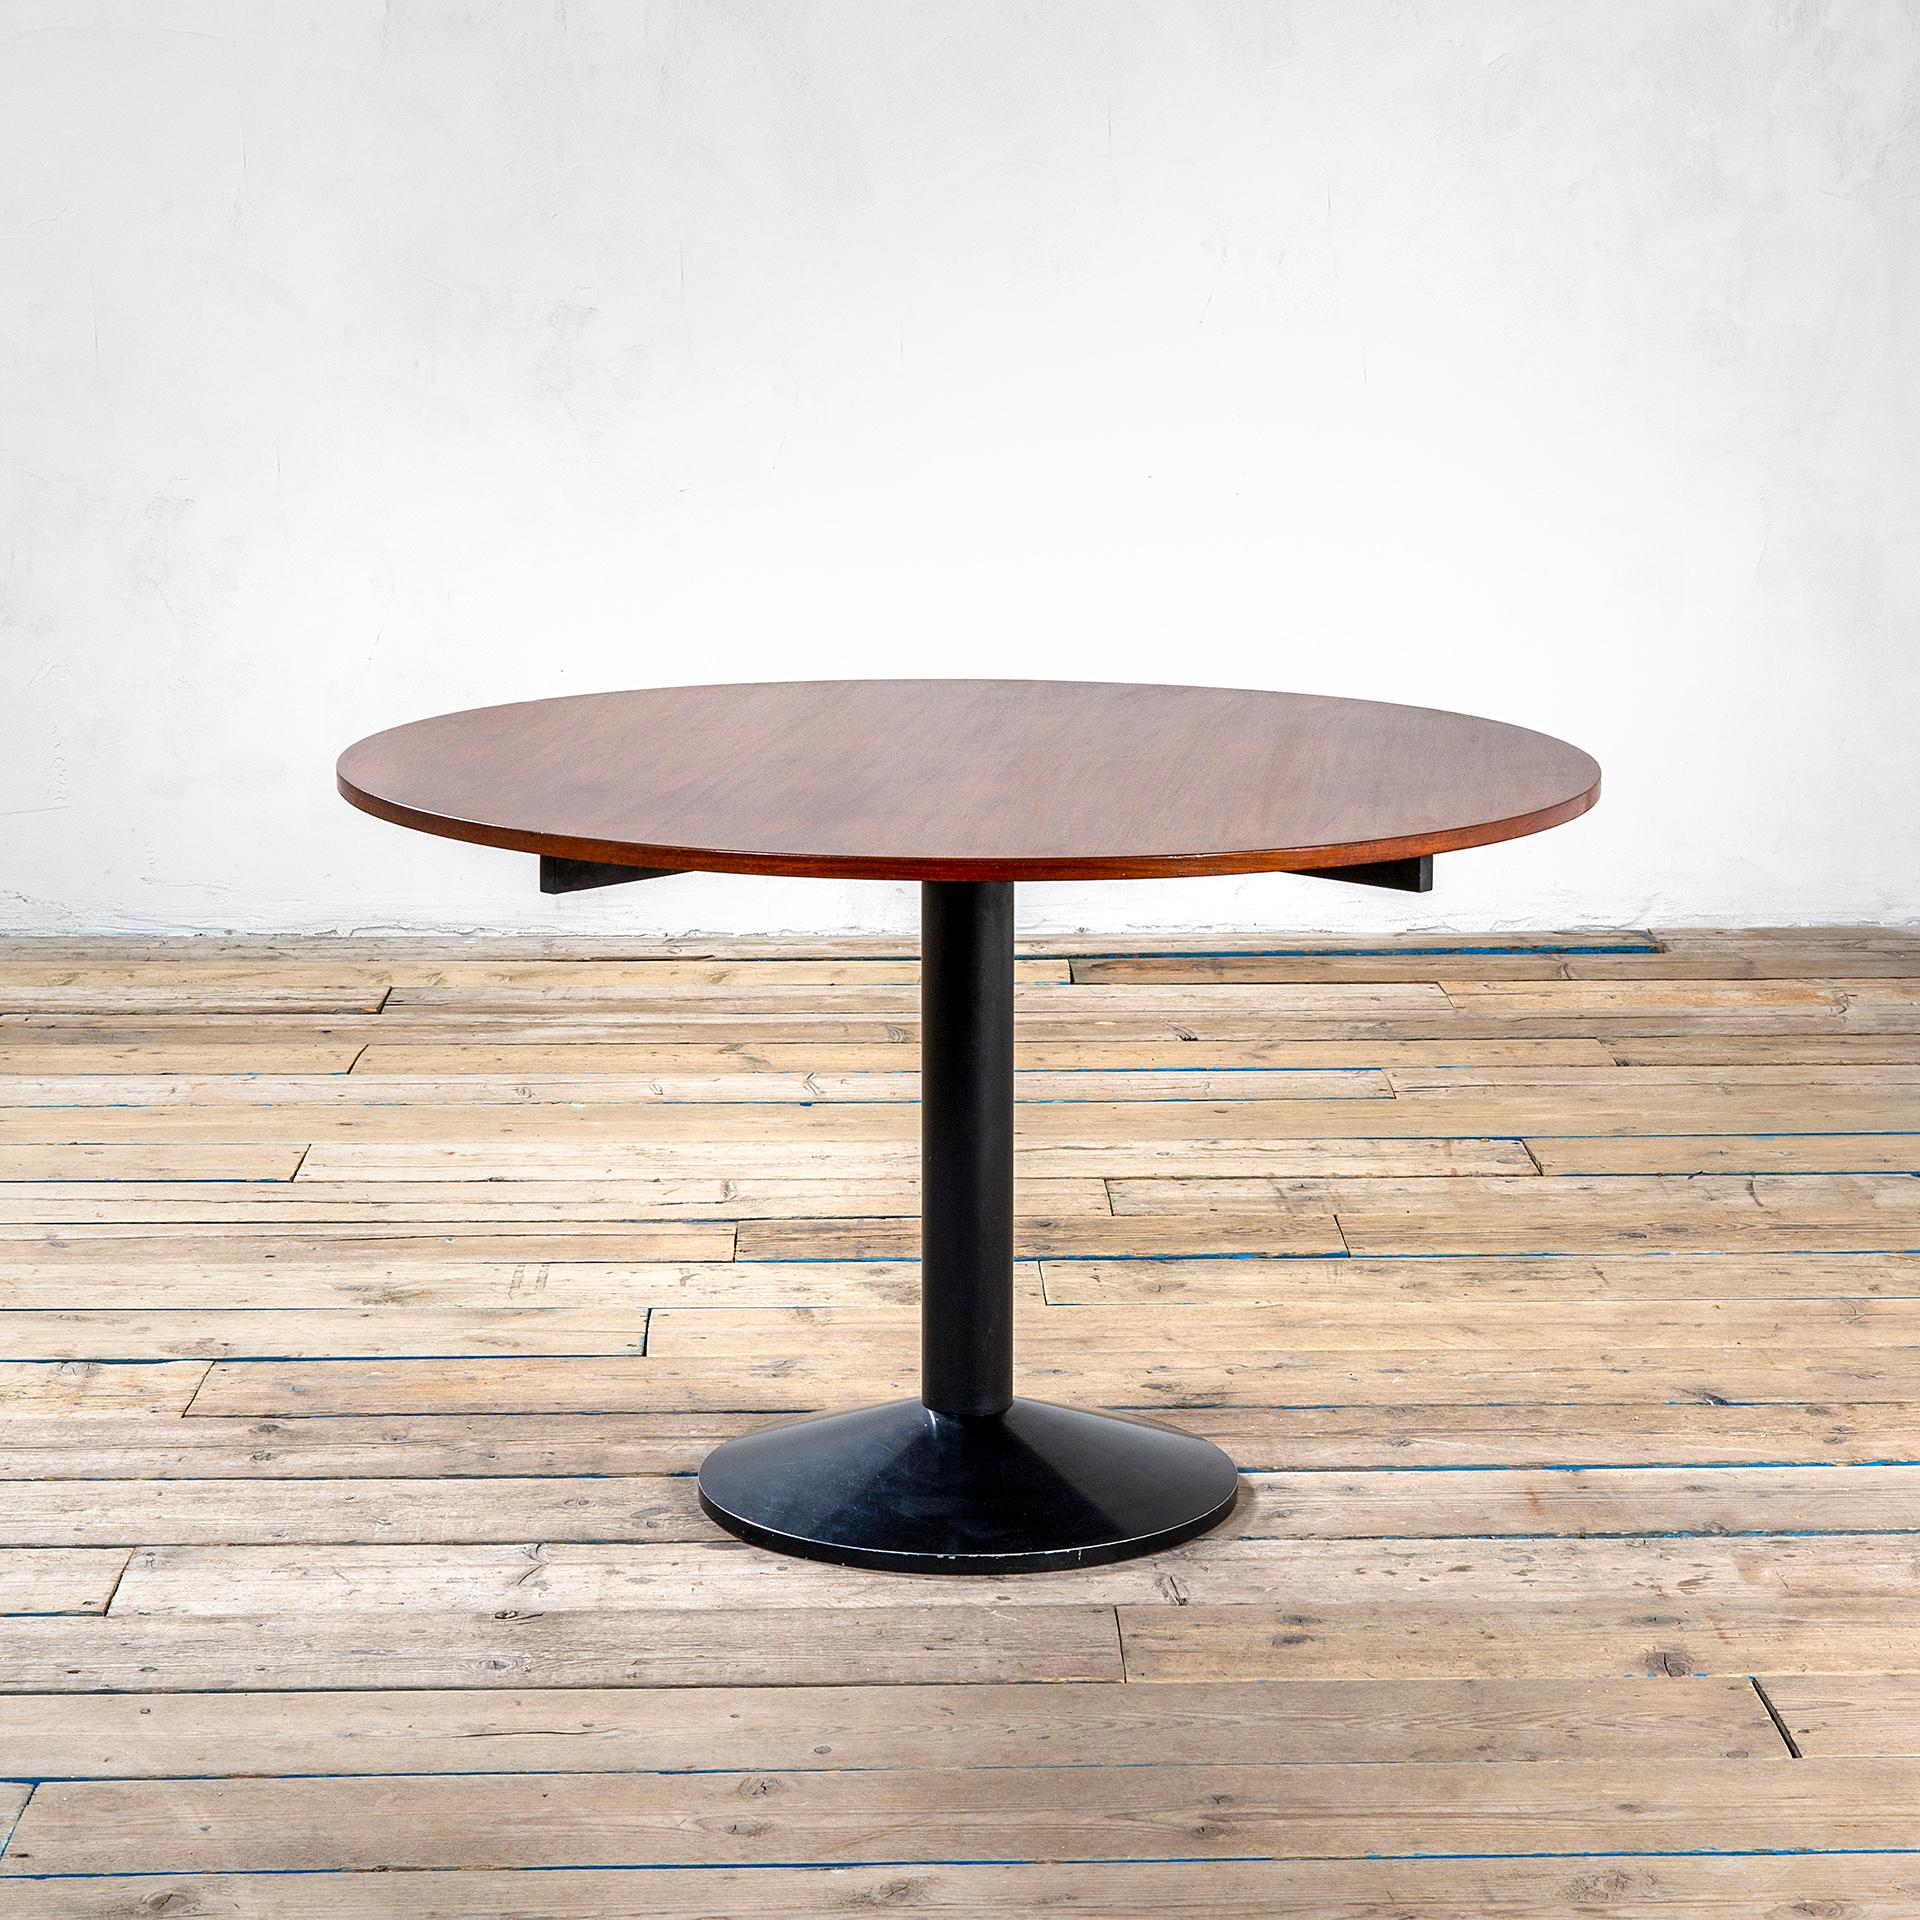 Iconic table designed by the great italian maestro Franco Albini in '50s. The name of the model is TL30, and it summarizes big part of the Albini's research: the theme of the lightness, research of the materials and obsession with balance. The